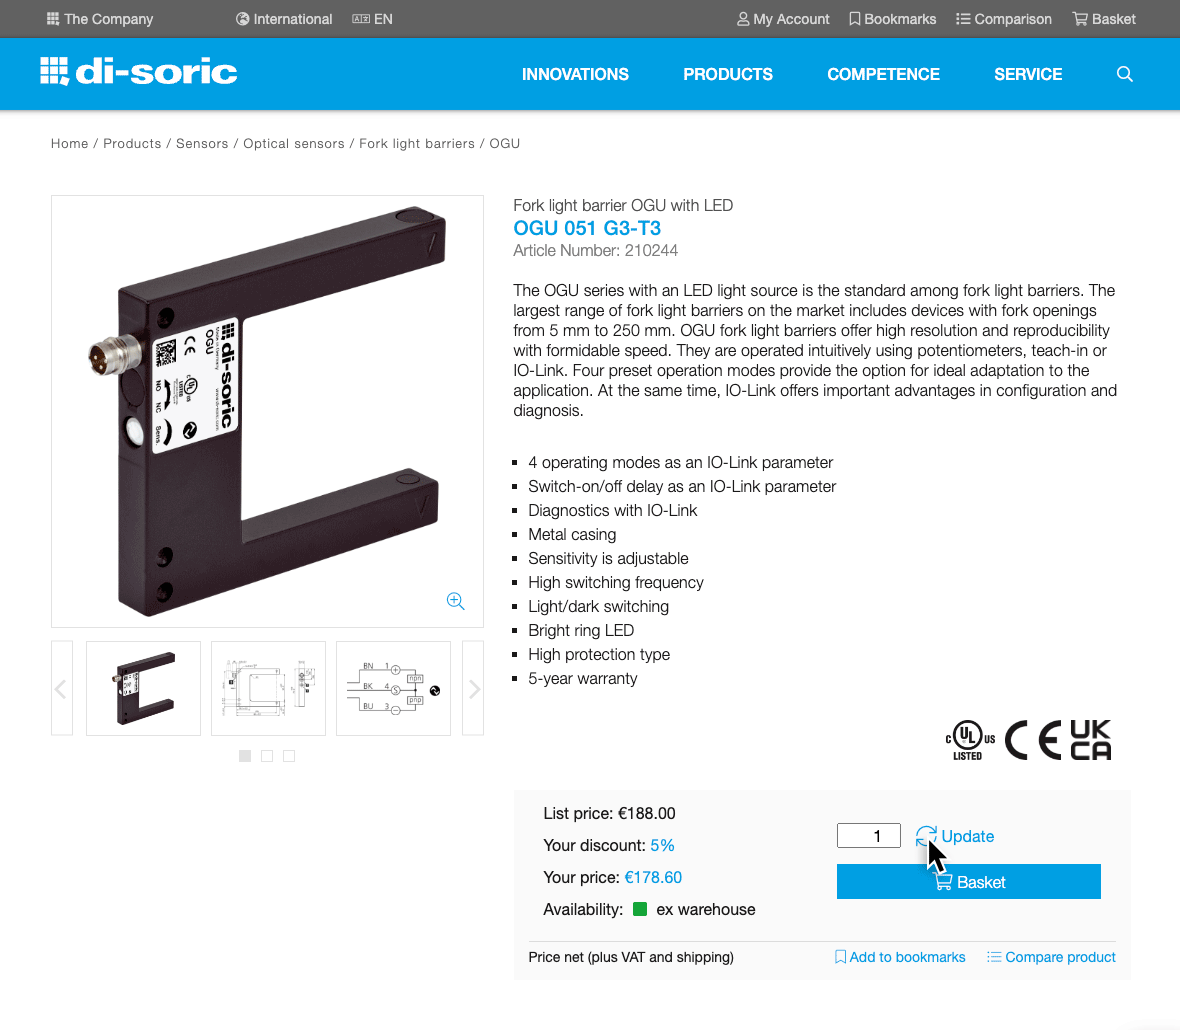 di-soric – Product details page